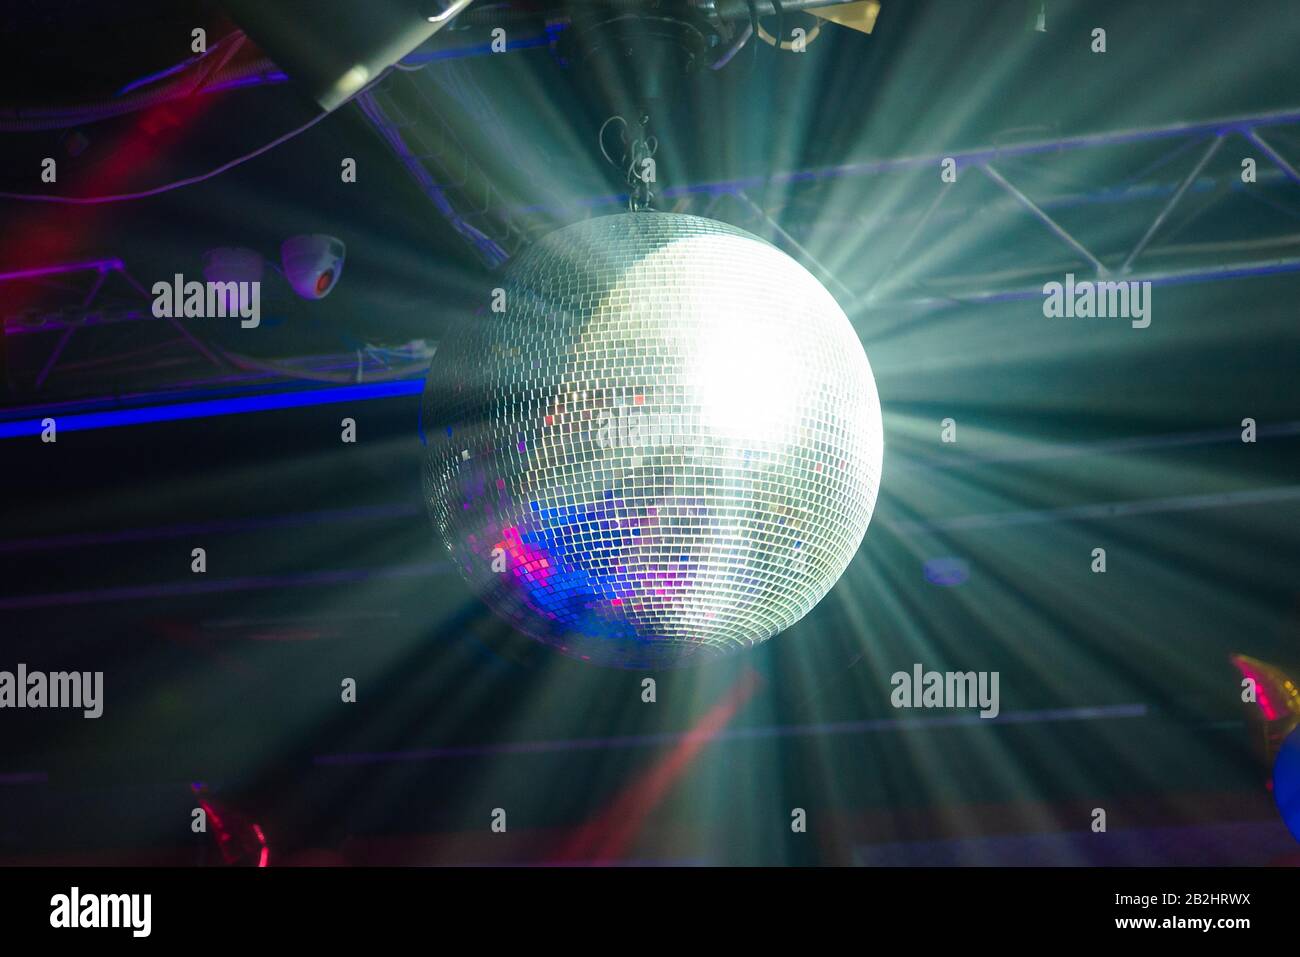 Abstract background from a night club. party lights disco ball Stock Photo